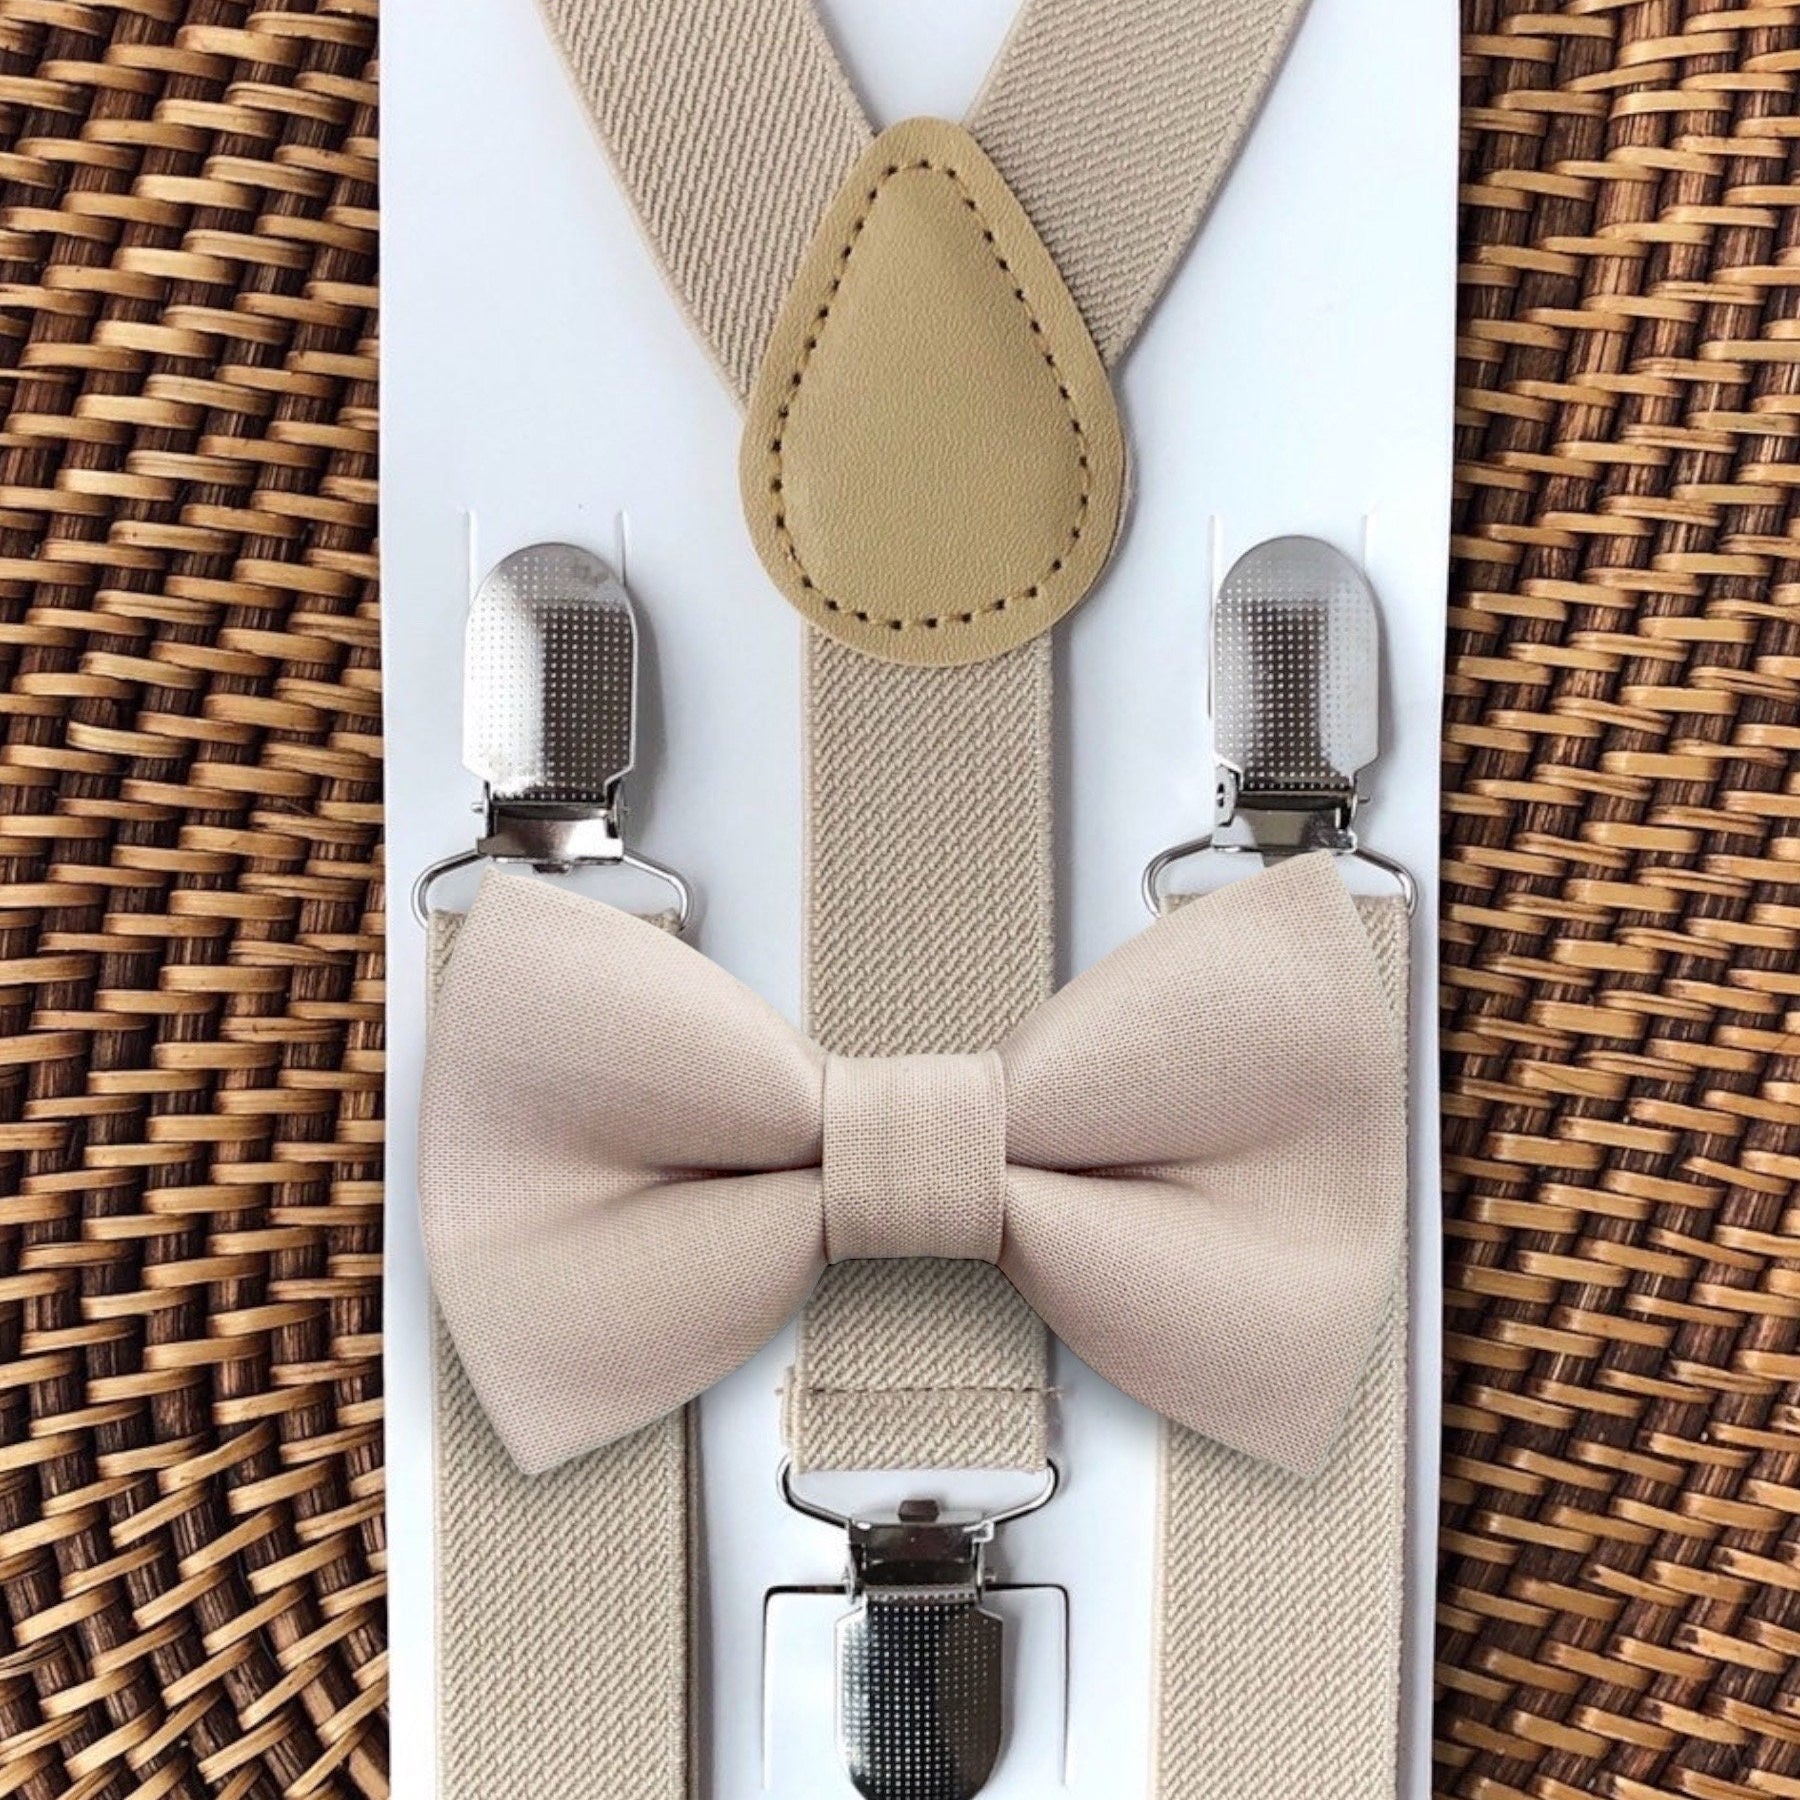 Biscotti Bow Tie for Wedding Bowtie & Suspenders, Tan Bow Tie for Ring Bearer or Mens Ties, Champagne Boys Bow Tie Suspenders Wedding Outfit